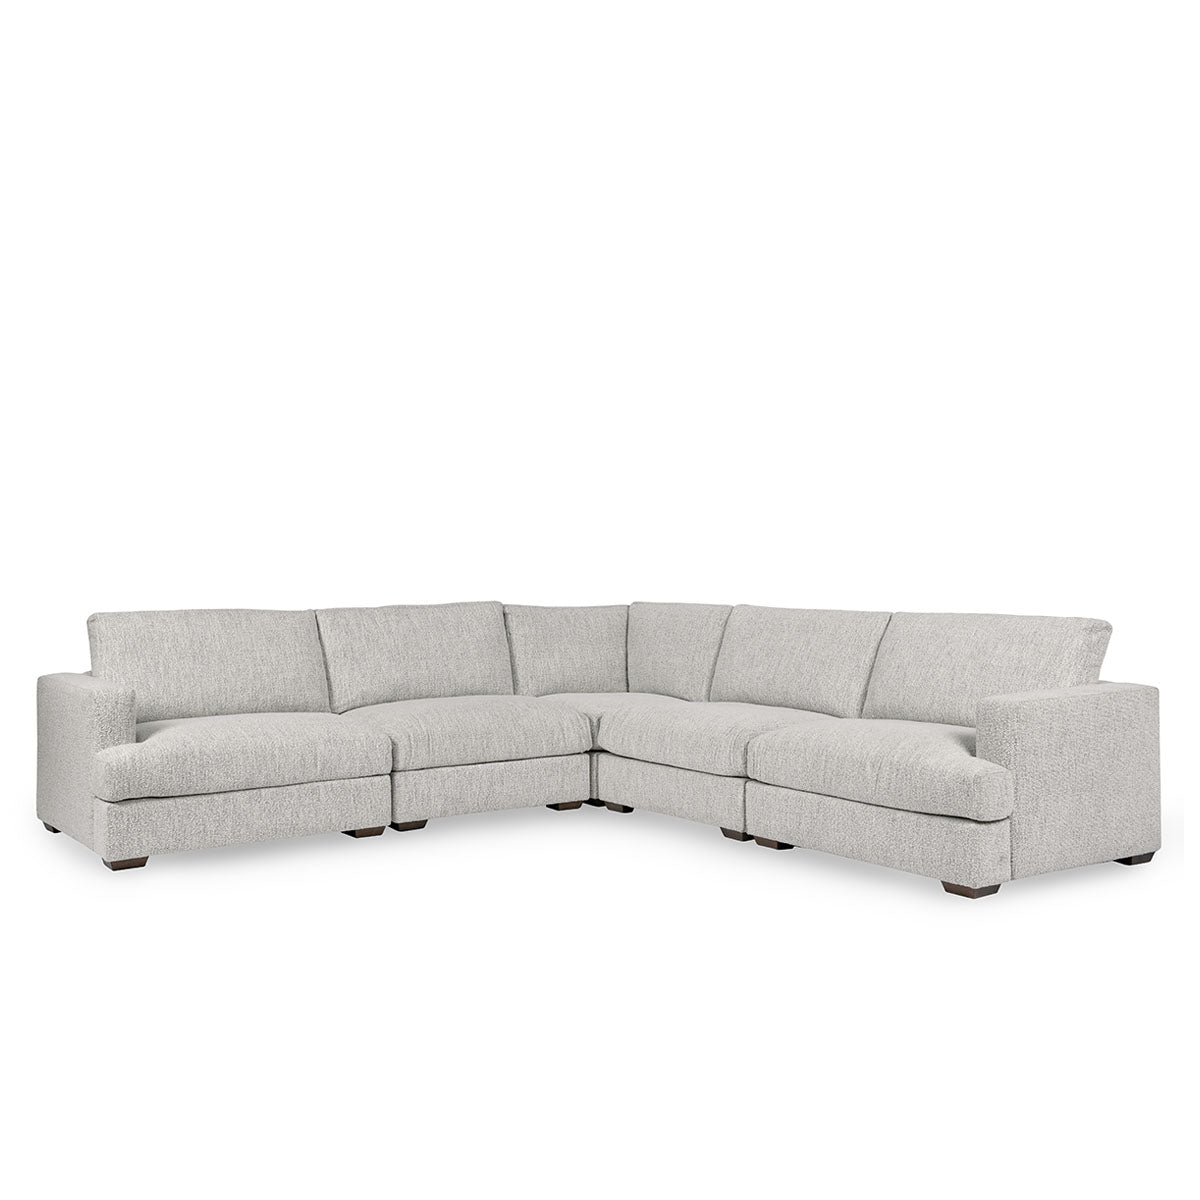 Ludwig Upholstered 5pc Sectional Ivory - Rug & Home